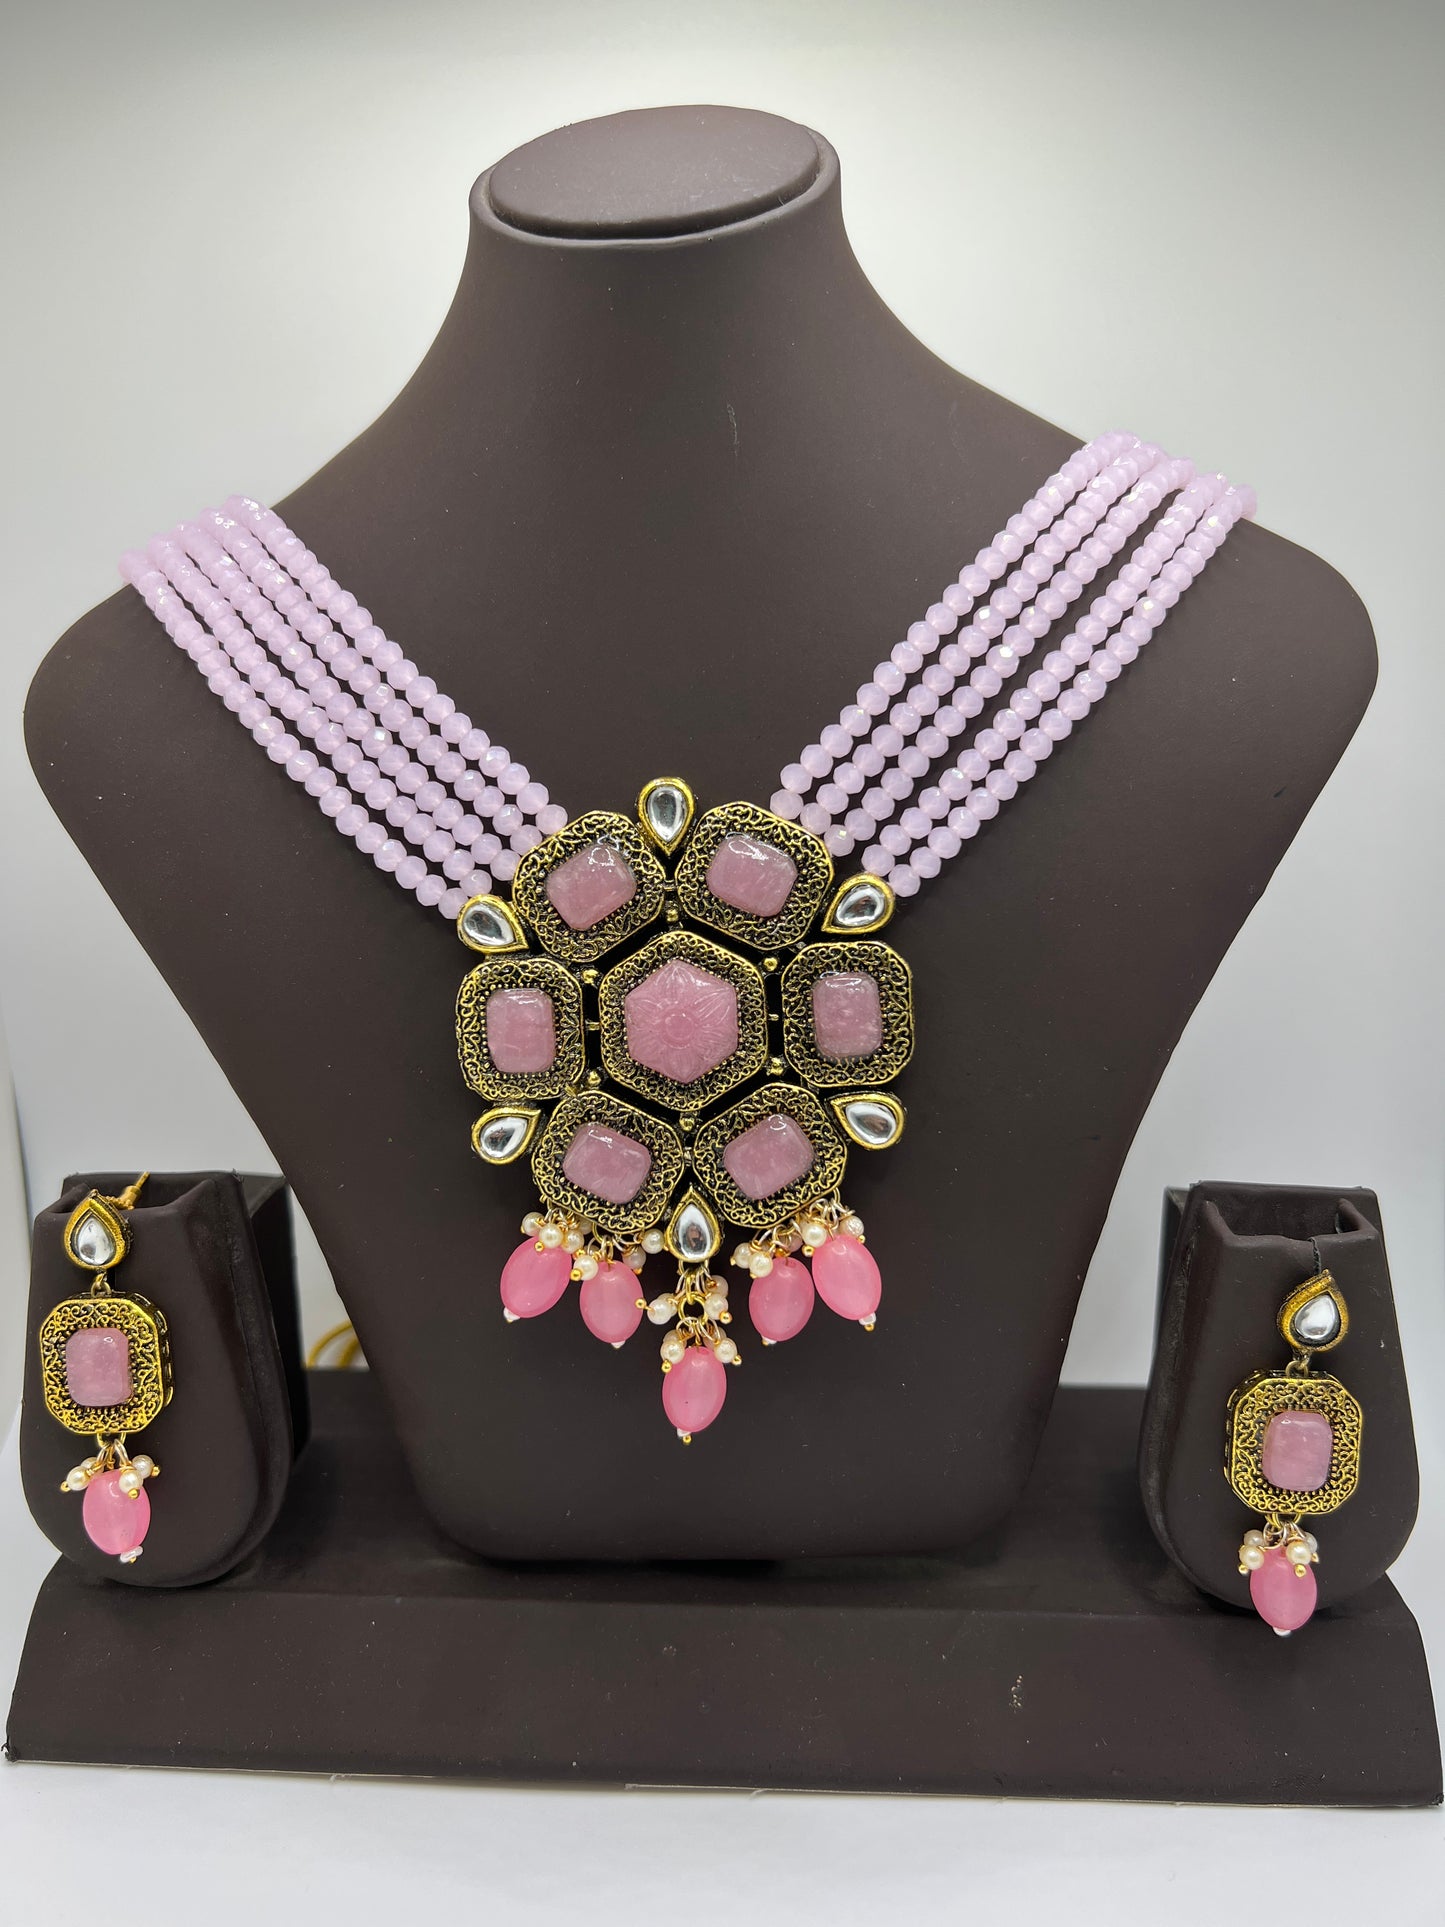 Renaissance Rose: Pink Gemstone Necklace and Earrings Set